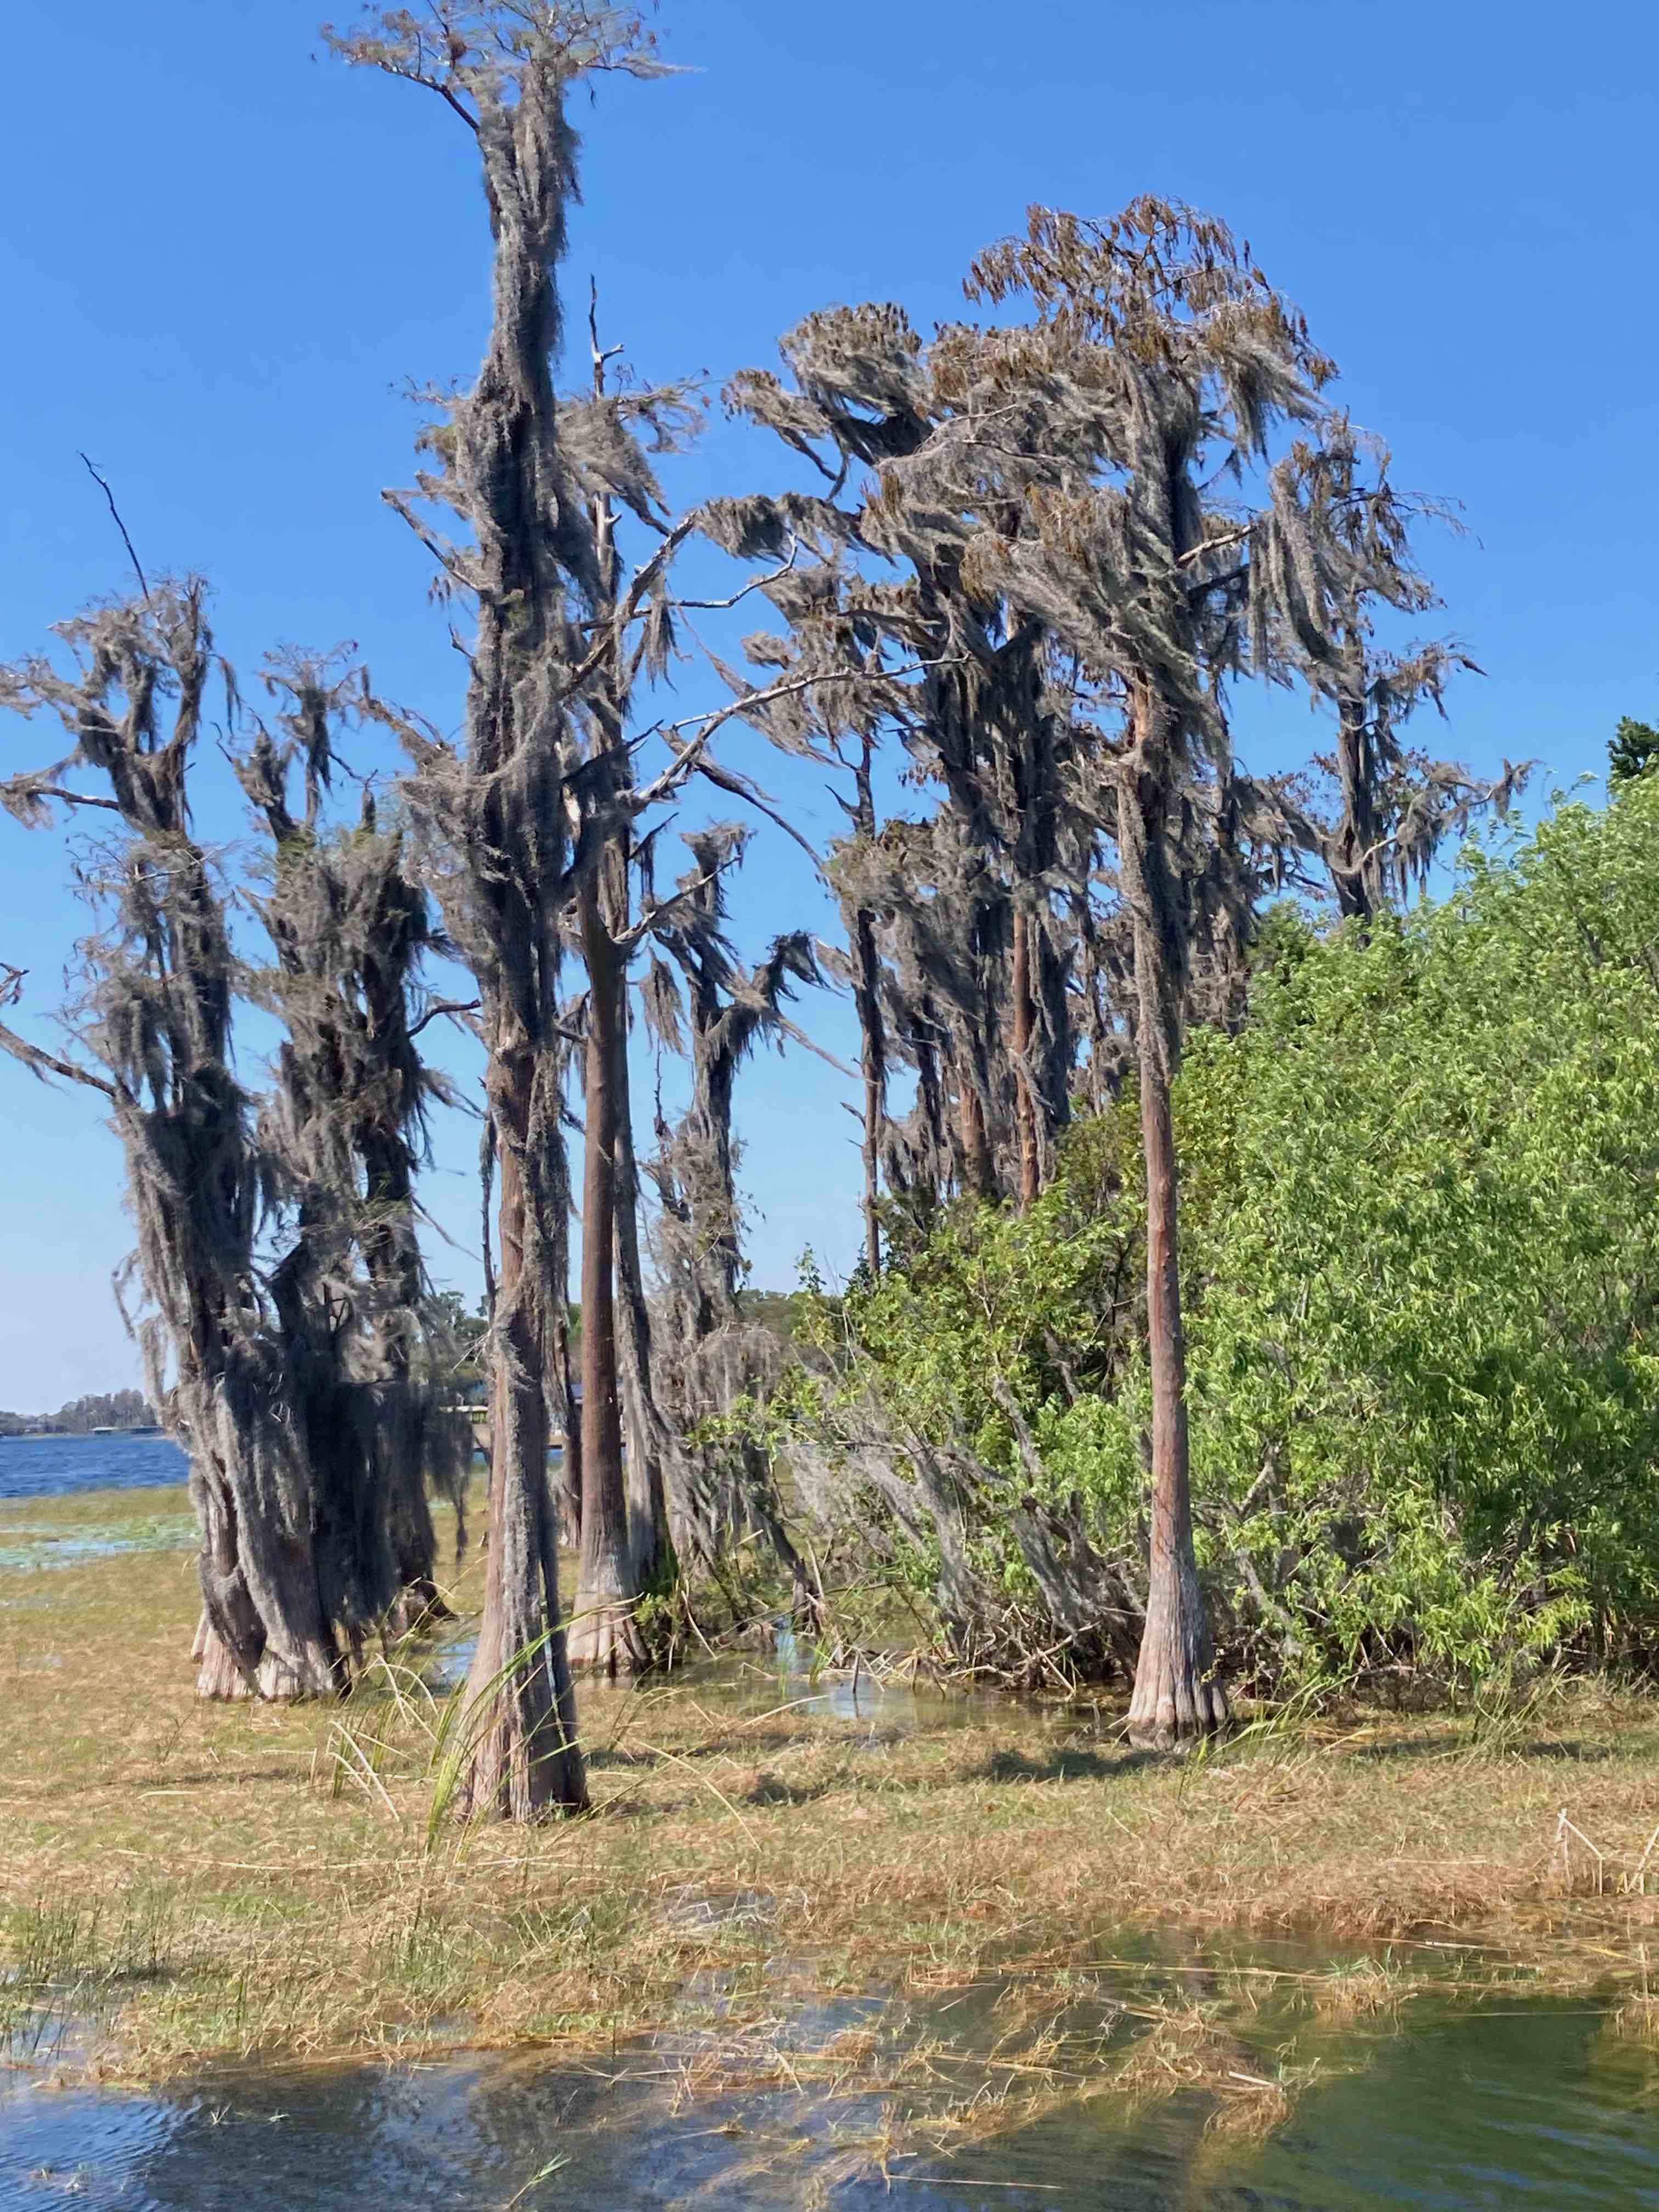 The Scientific Name is Taxodium distichum. You will likely hear them called Bald Cypress, Baldcypress, Swamp Cypress. This picture shows the  During its dormant season prior to leaf emergence, covered in Spanish Moss. of Taxodium distichum